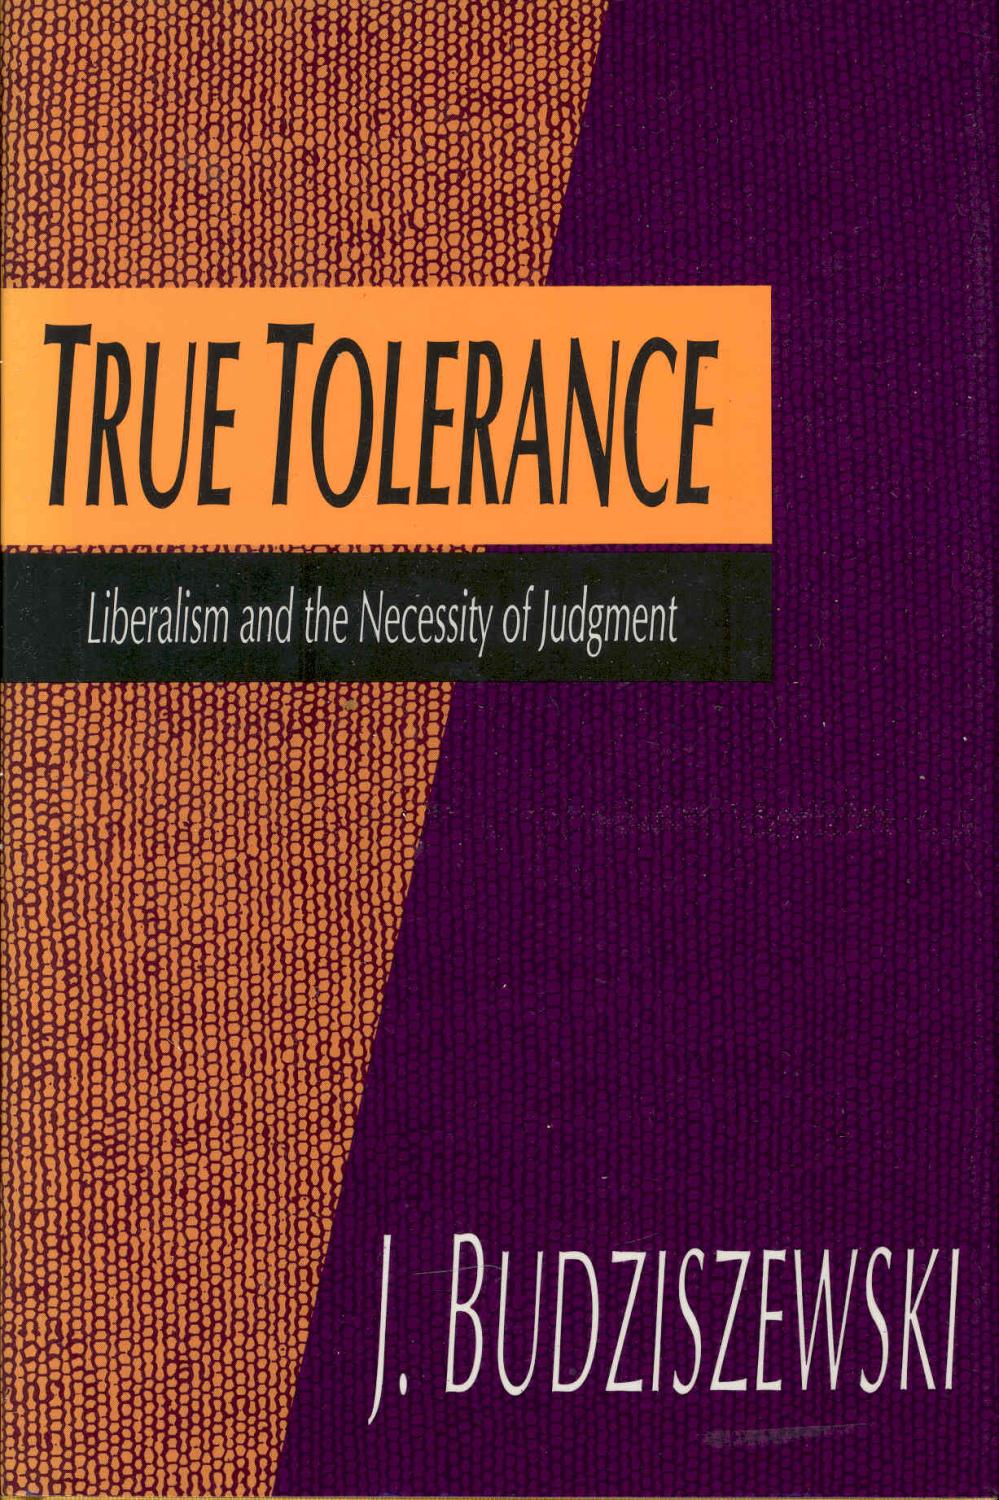 True tolerance : liberalism and the necessity of judgment [The Idea -- Illustrations of True Tolerance in Three Spheres of Regulation -- Is True Tolerance Constitutional? -- The Heads of the Hydra -- Arguments for Ethical Neutrality -- An Exploded View of Neutrality -- Special Cases of True Tolerance -- The Special Case of Tolerance in Education and Nurture -- Abuse of the Free Speech and Free Press Clauses The State Involvement with Obscenity -- The Special Case of Religious Tolerance -- Tolerance and the Ultimate Concern -- True Tolerance Again -- Is This a Possible Constitutional Position? -- Epilogue The Great Refusal -- The Counsels of Tolerance A Subset -- Constitutional Interpretation -- Liberal Education Contrasted with Authoritaria - Budziszewski, J., 1952-